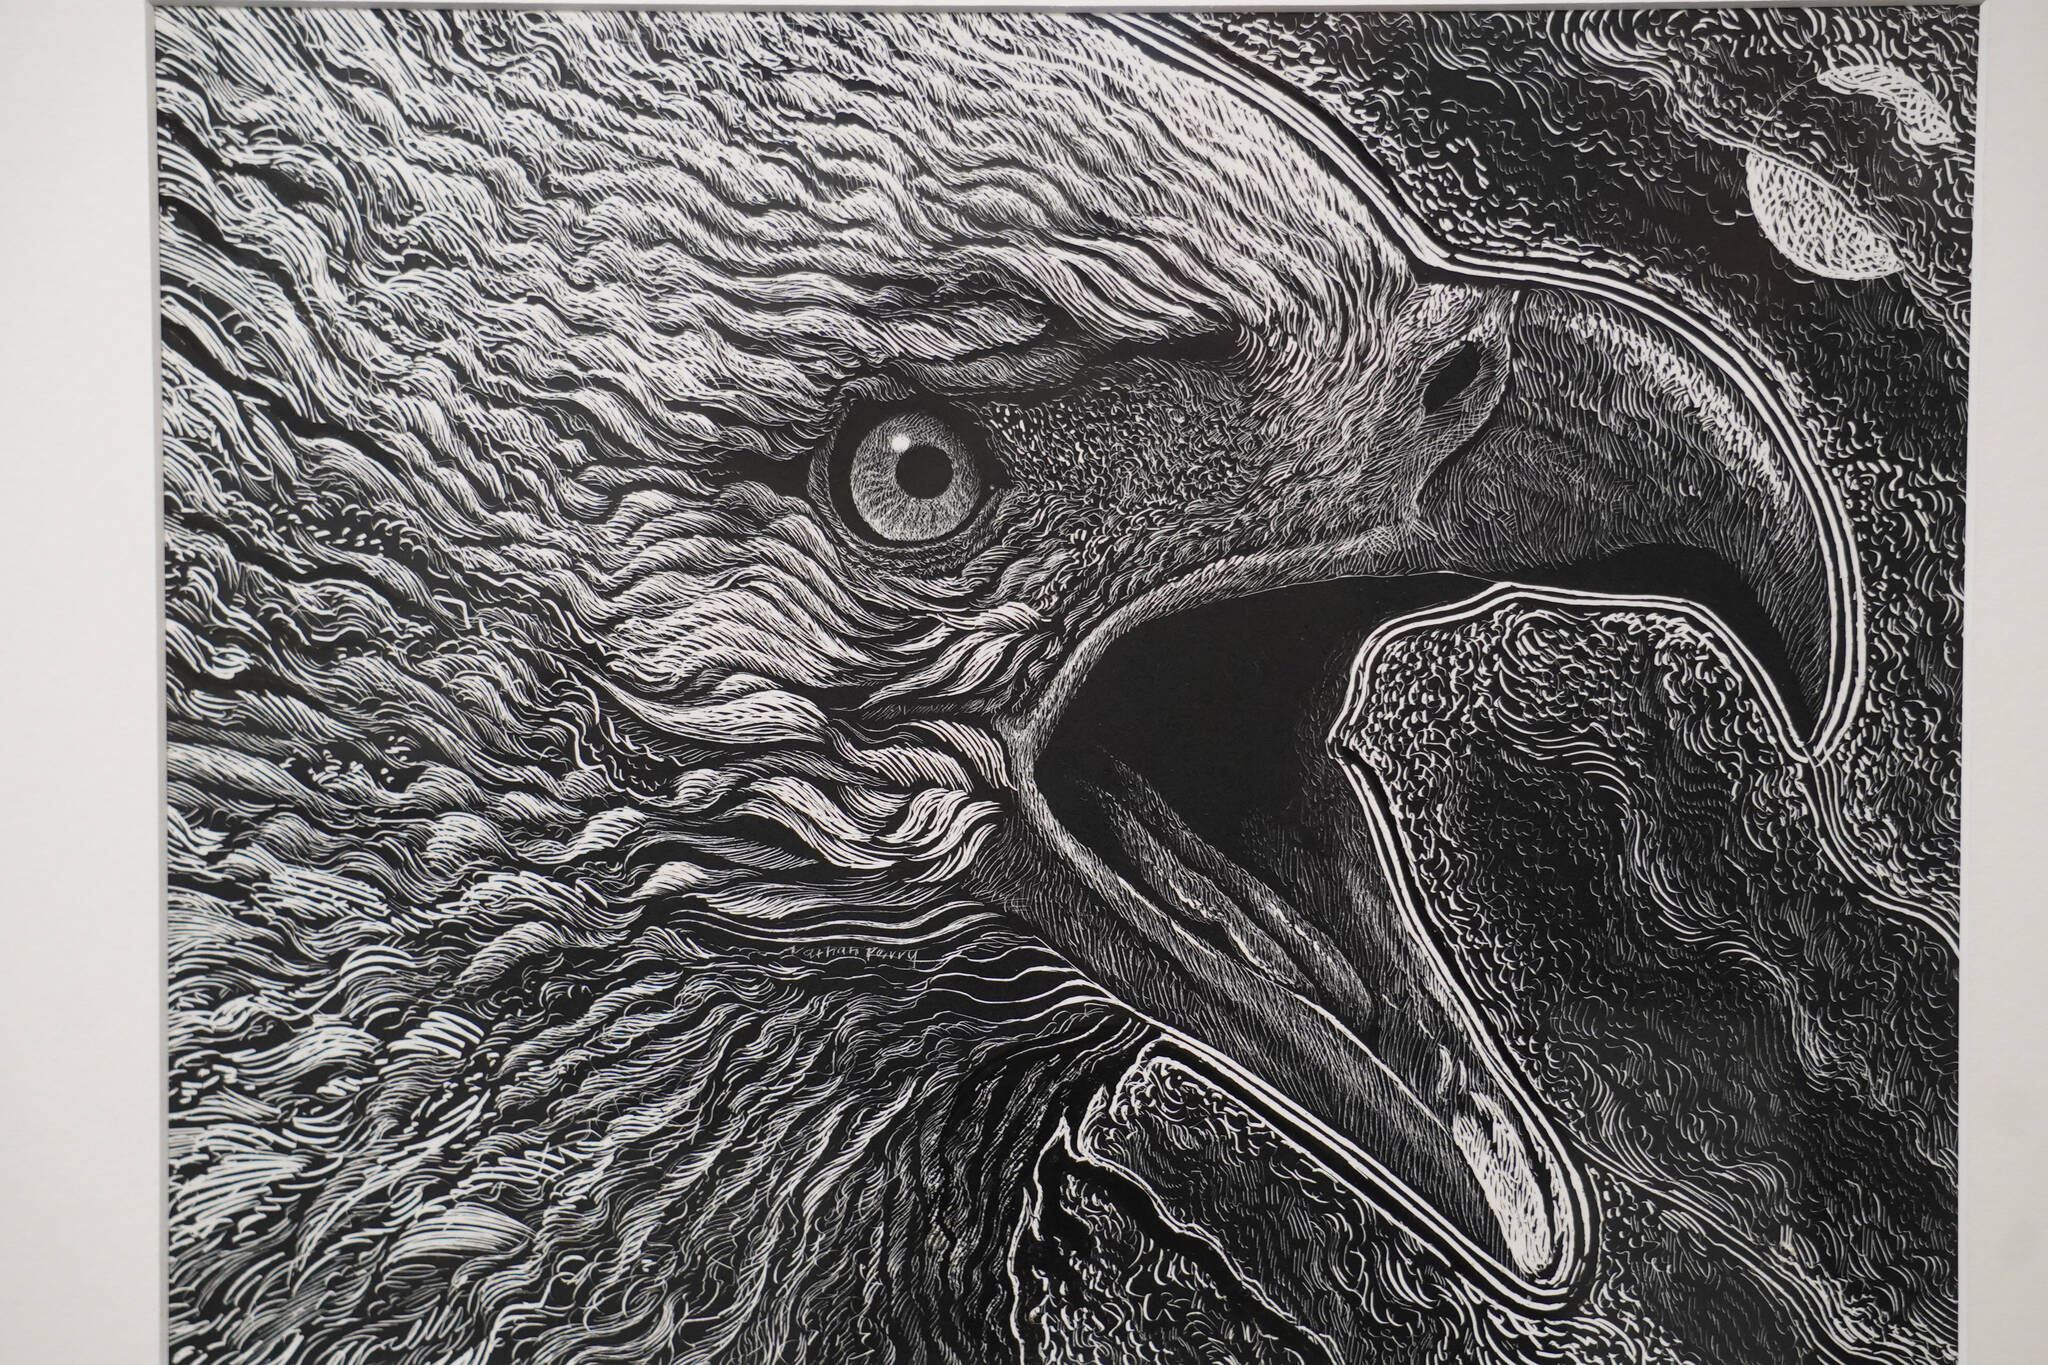 A stylized drawing of an eagle by artist Nathan Perry hangs as part of “Elaborate Expressions” at the Kenai Art Center in Kenai, Alaska on May 3, 2023. (Jake Dye/Peninsula Clarion)